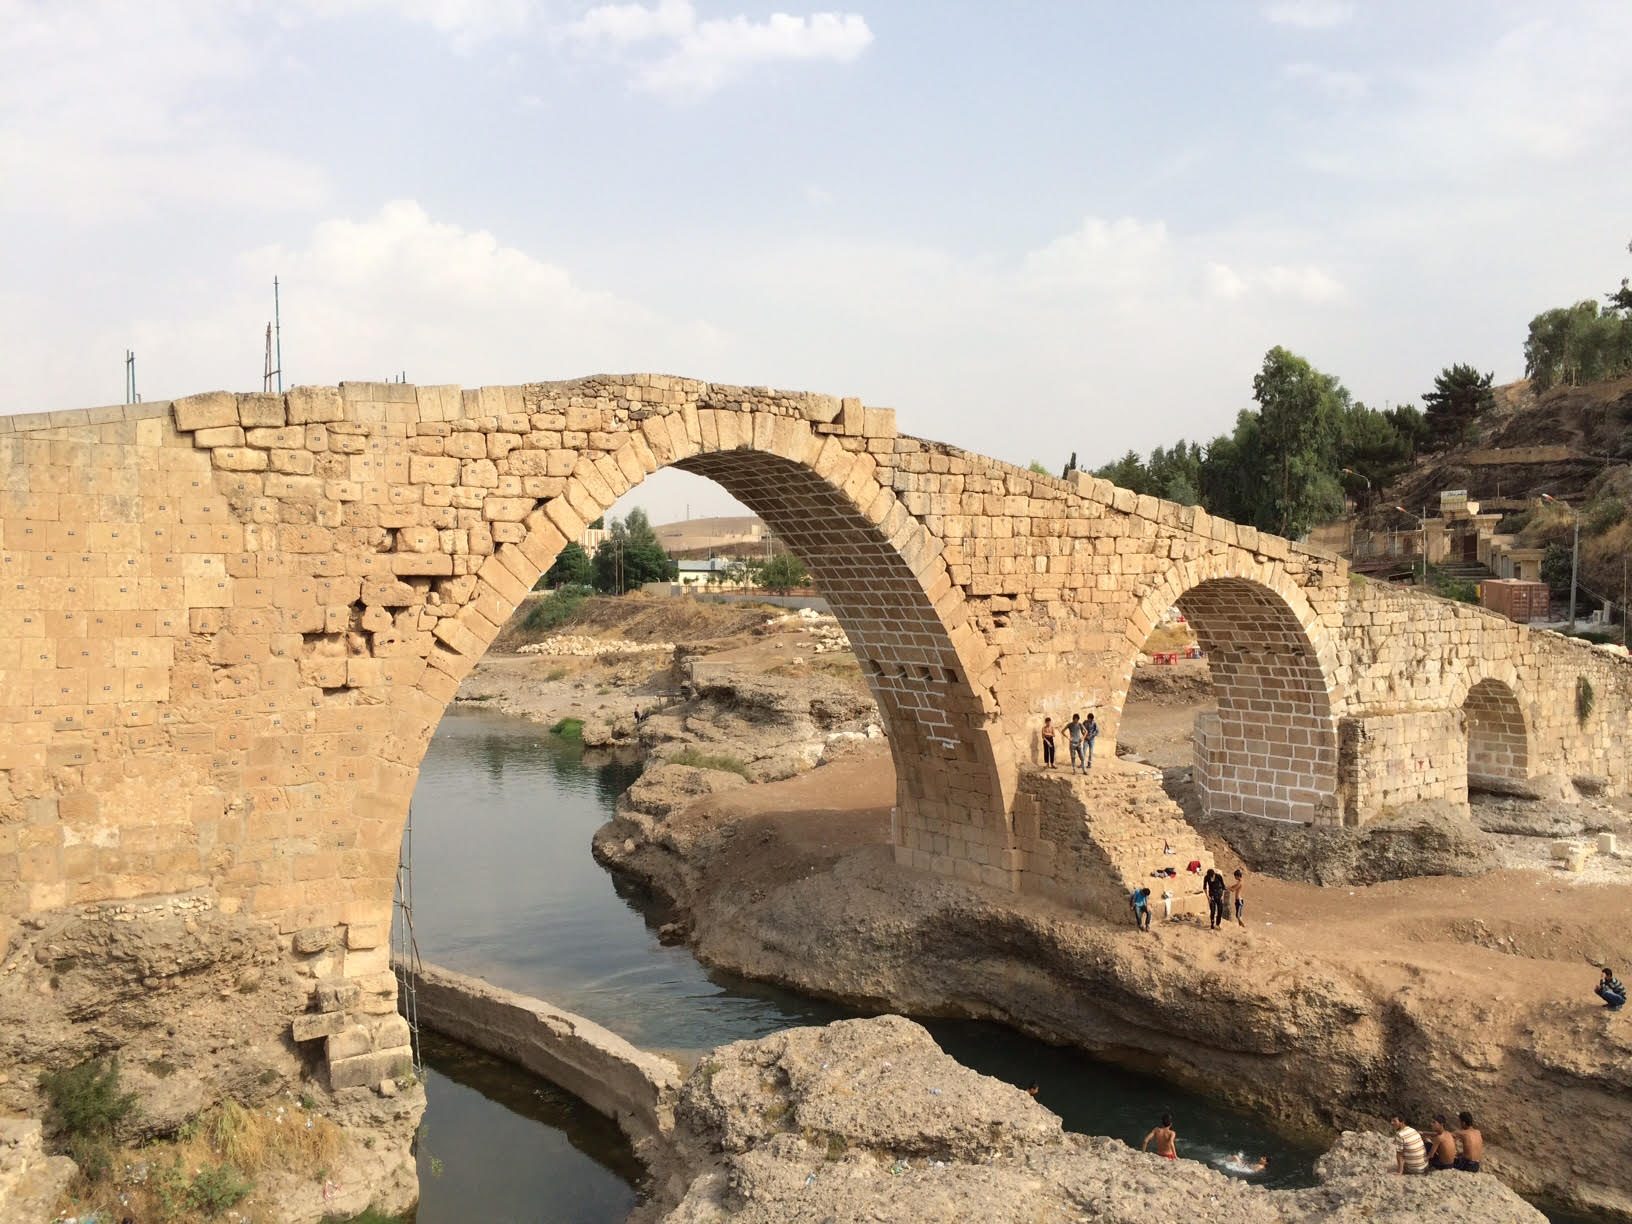 The Delai Bridge in Zakho, the Kurdistan Region of Iraq dates back from the Roman era. The Kurdish region is one of the most beautiful I've ever been â almost an extreme to the pains of over a million displaced because of the conflict. Check the security protocols and be prepared to follow them when you travel to countries with strict rules in a sensitive situation. Be mindful and respectful of traditions and local customs, too. The clothes you wear freely in your own country might not be allowed. 